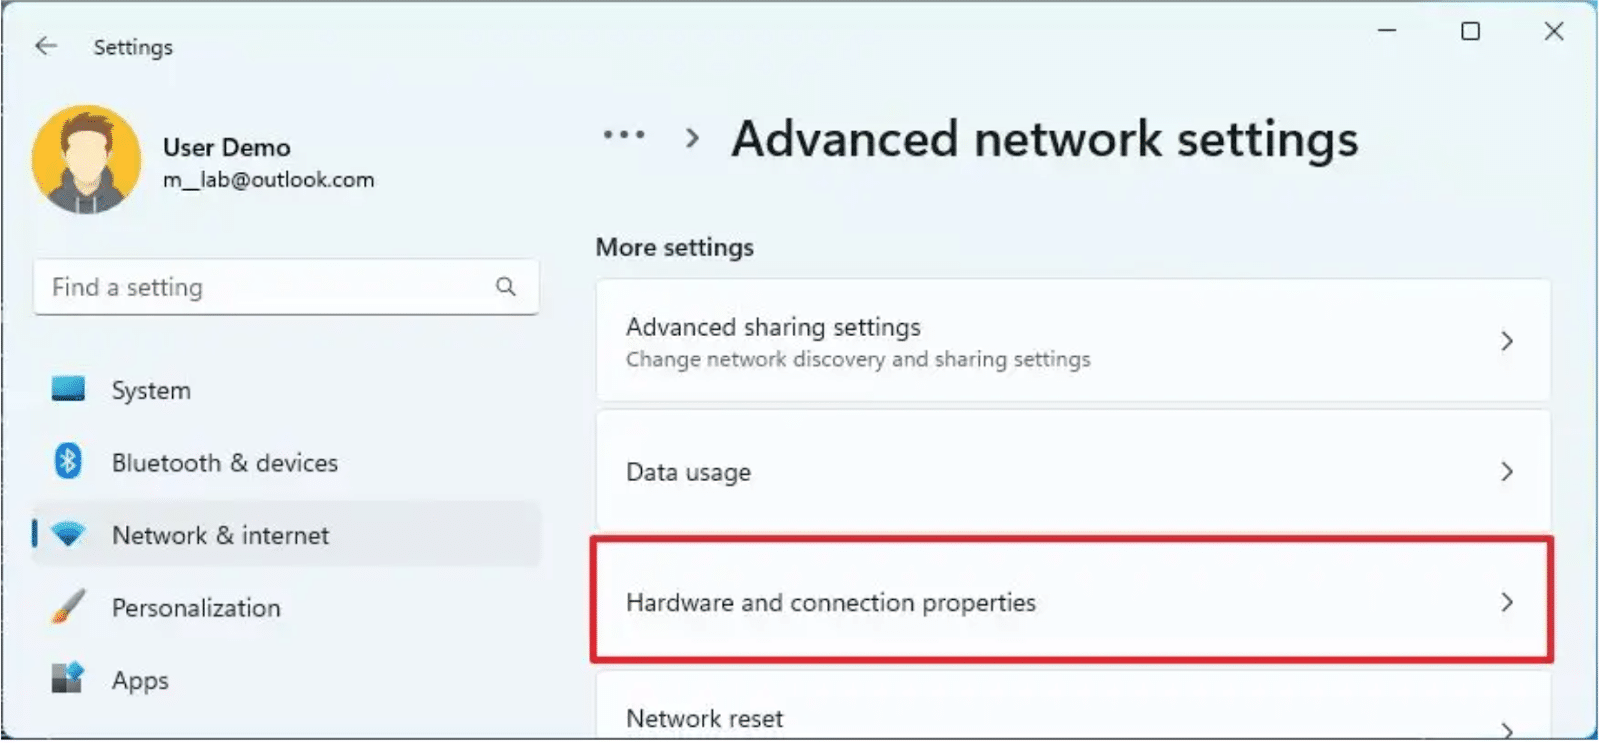 Open the "Hardware and connection properties" section